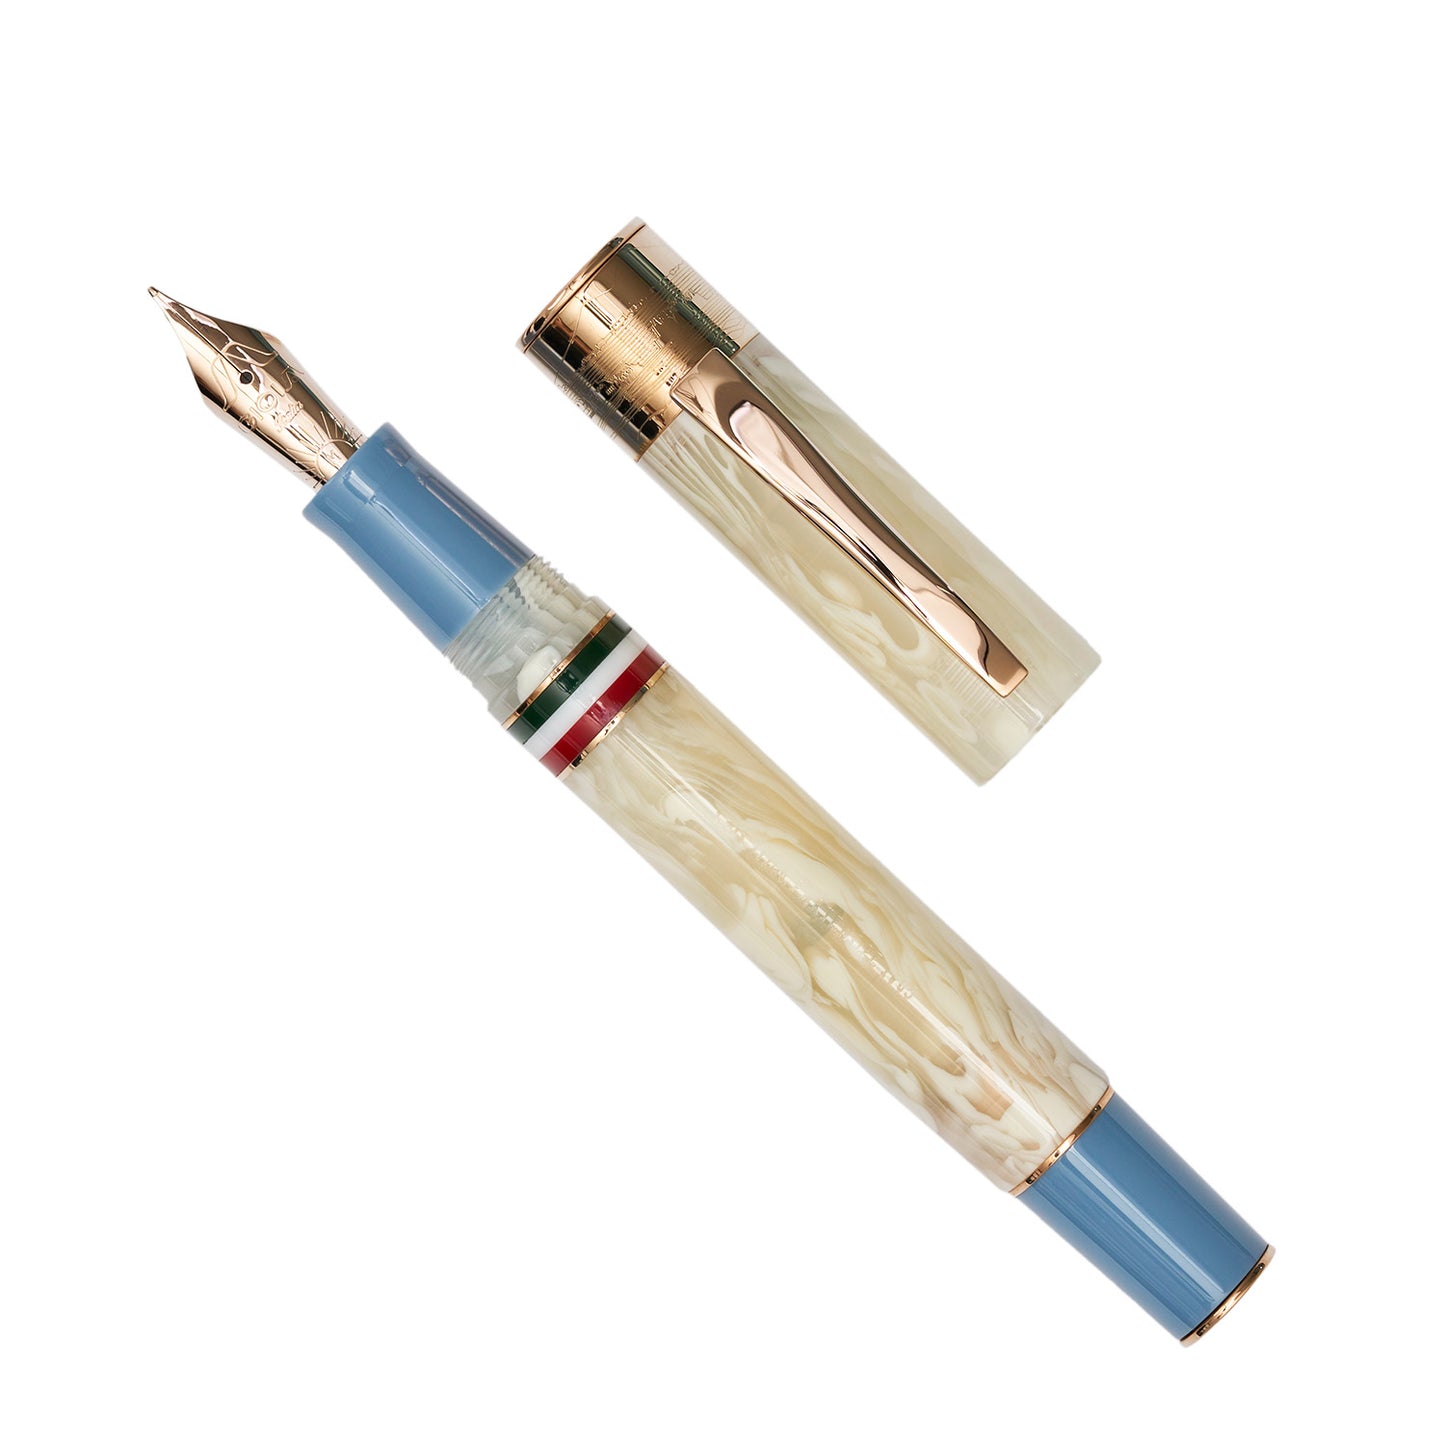 Gioia Partenope Fountain Pen + Rollerball - Avorio - Rose Gold Trim Made in Italy Uncapped